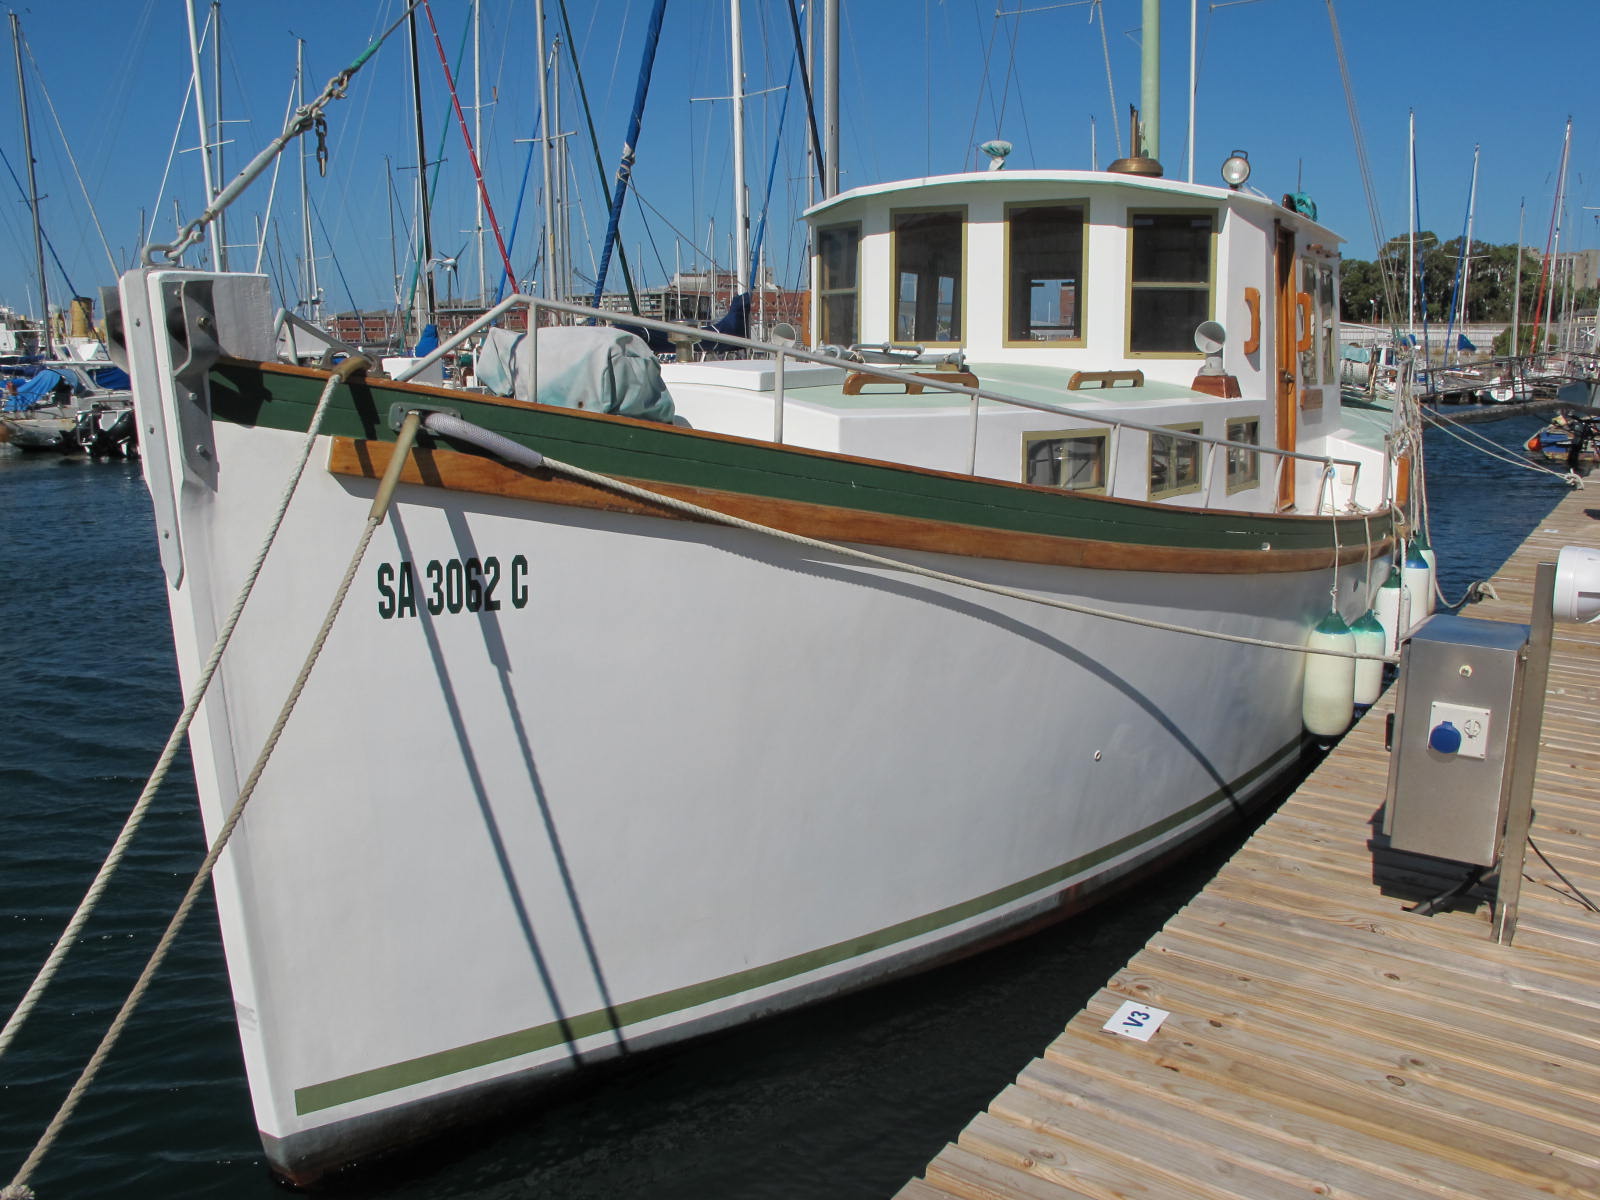 ckd boats - roy mc bride: diesel duck 38,its one of ours!